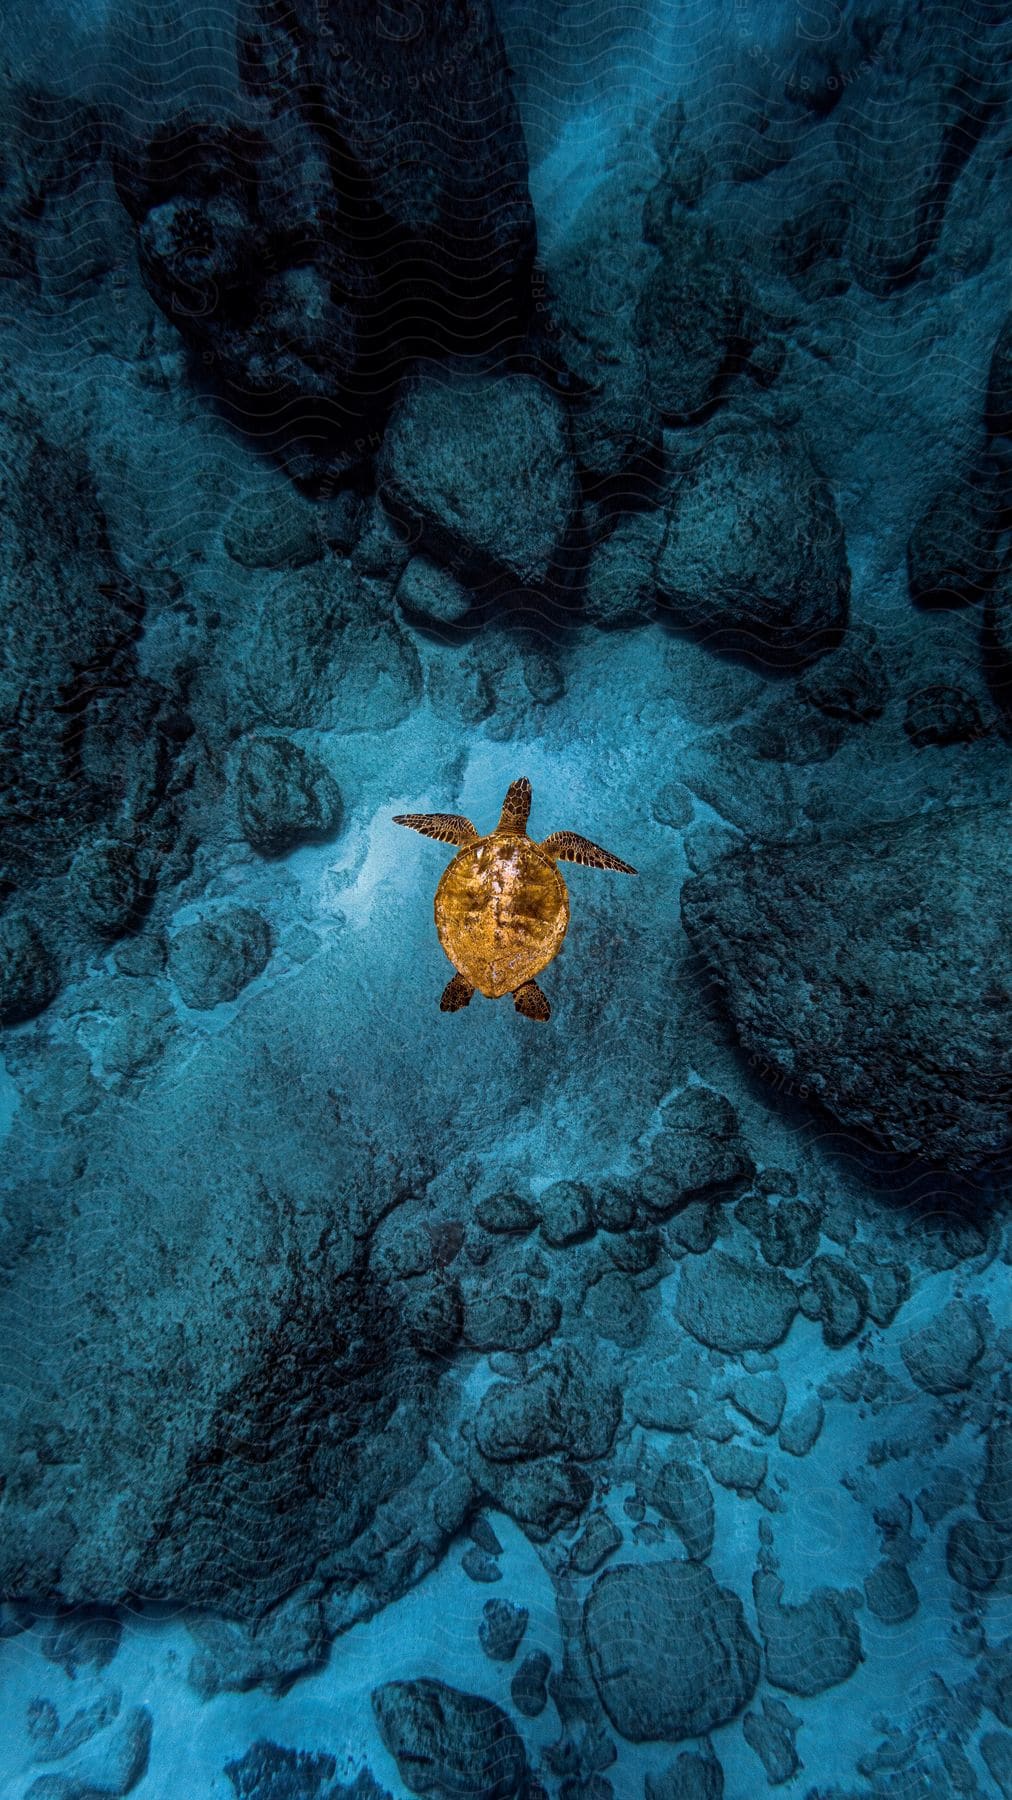 A sea turtle floating near rocks at the bottom of the water